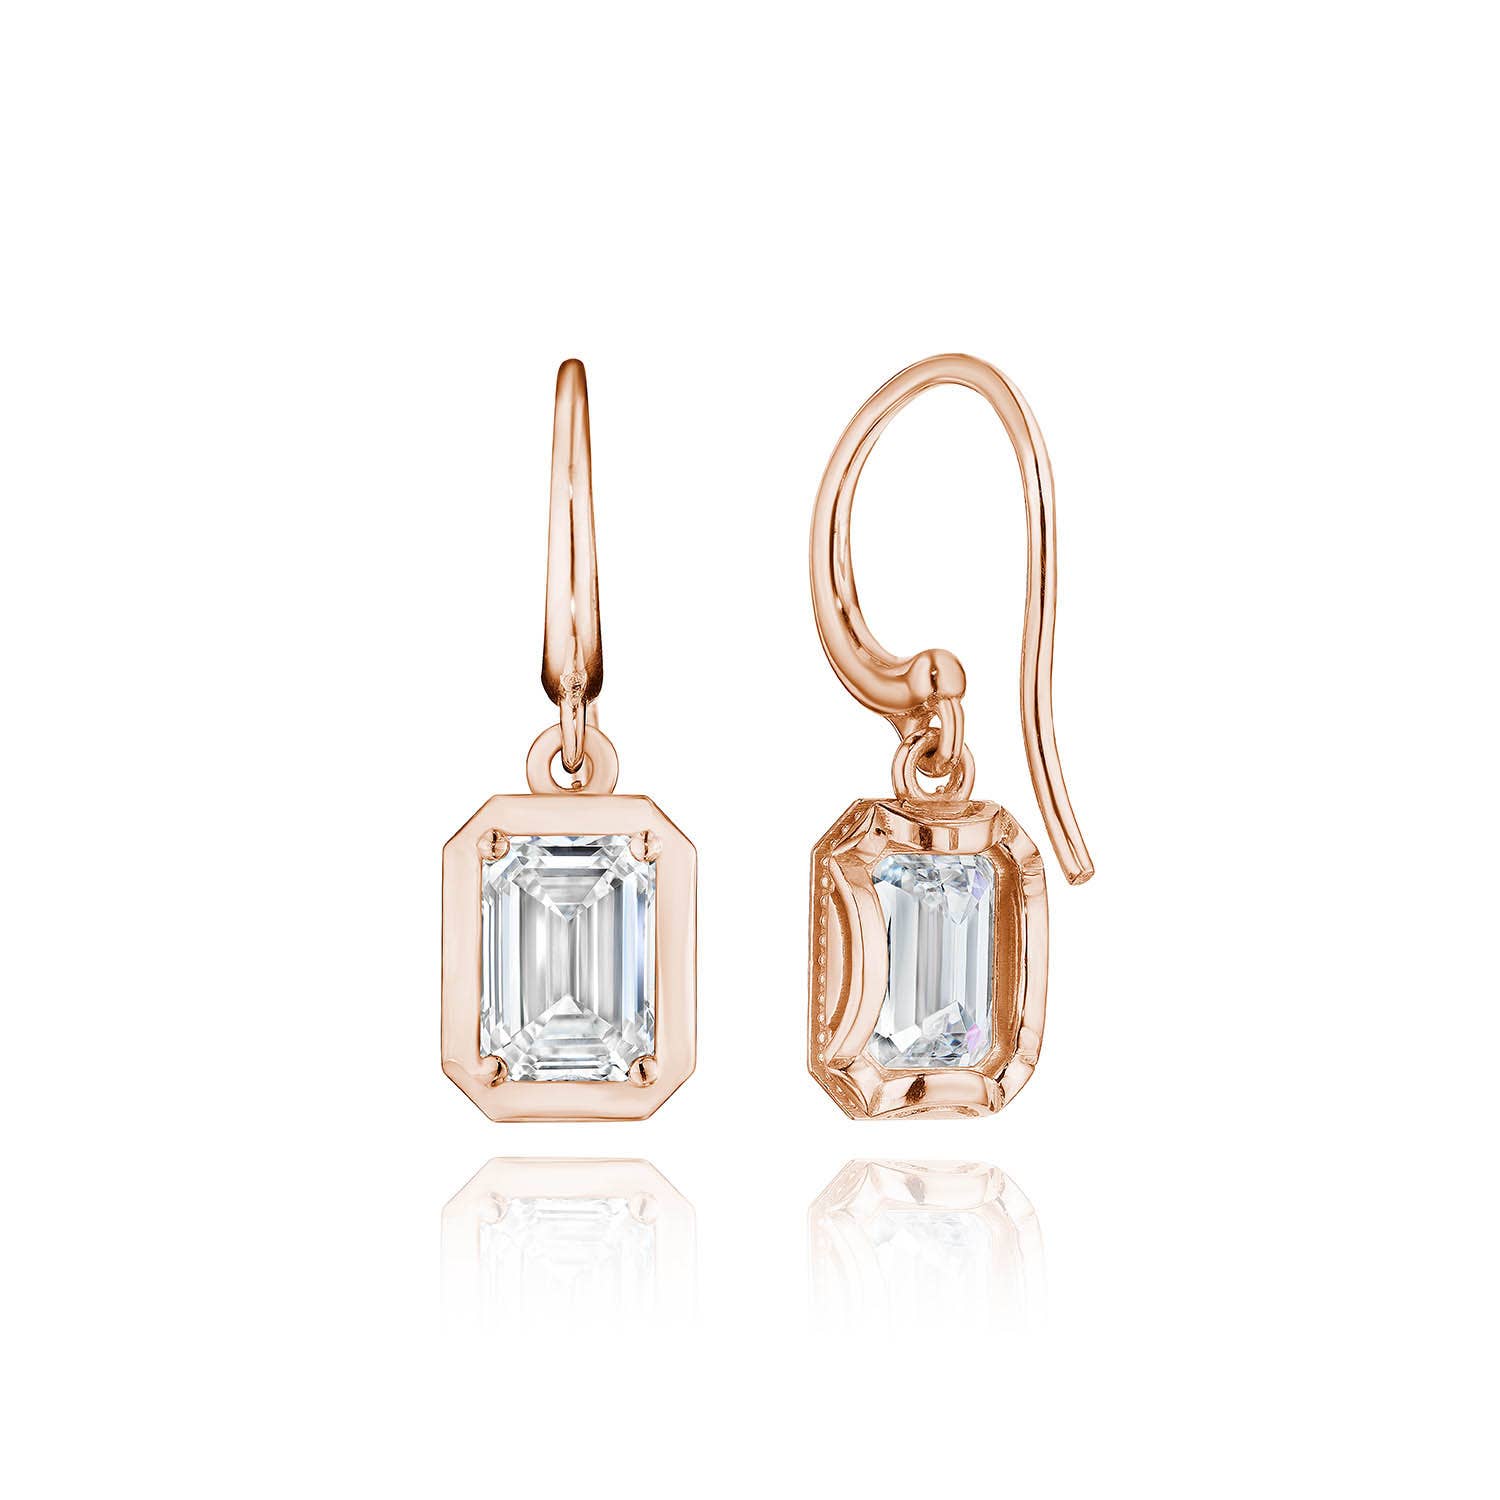 Diamond French Wire Earring - 1.5ct